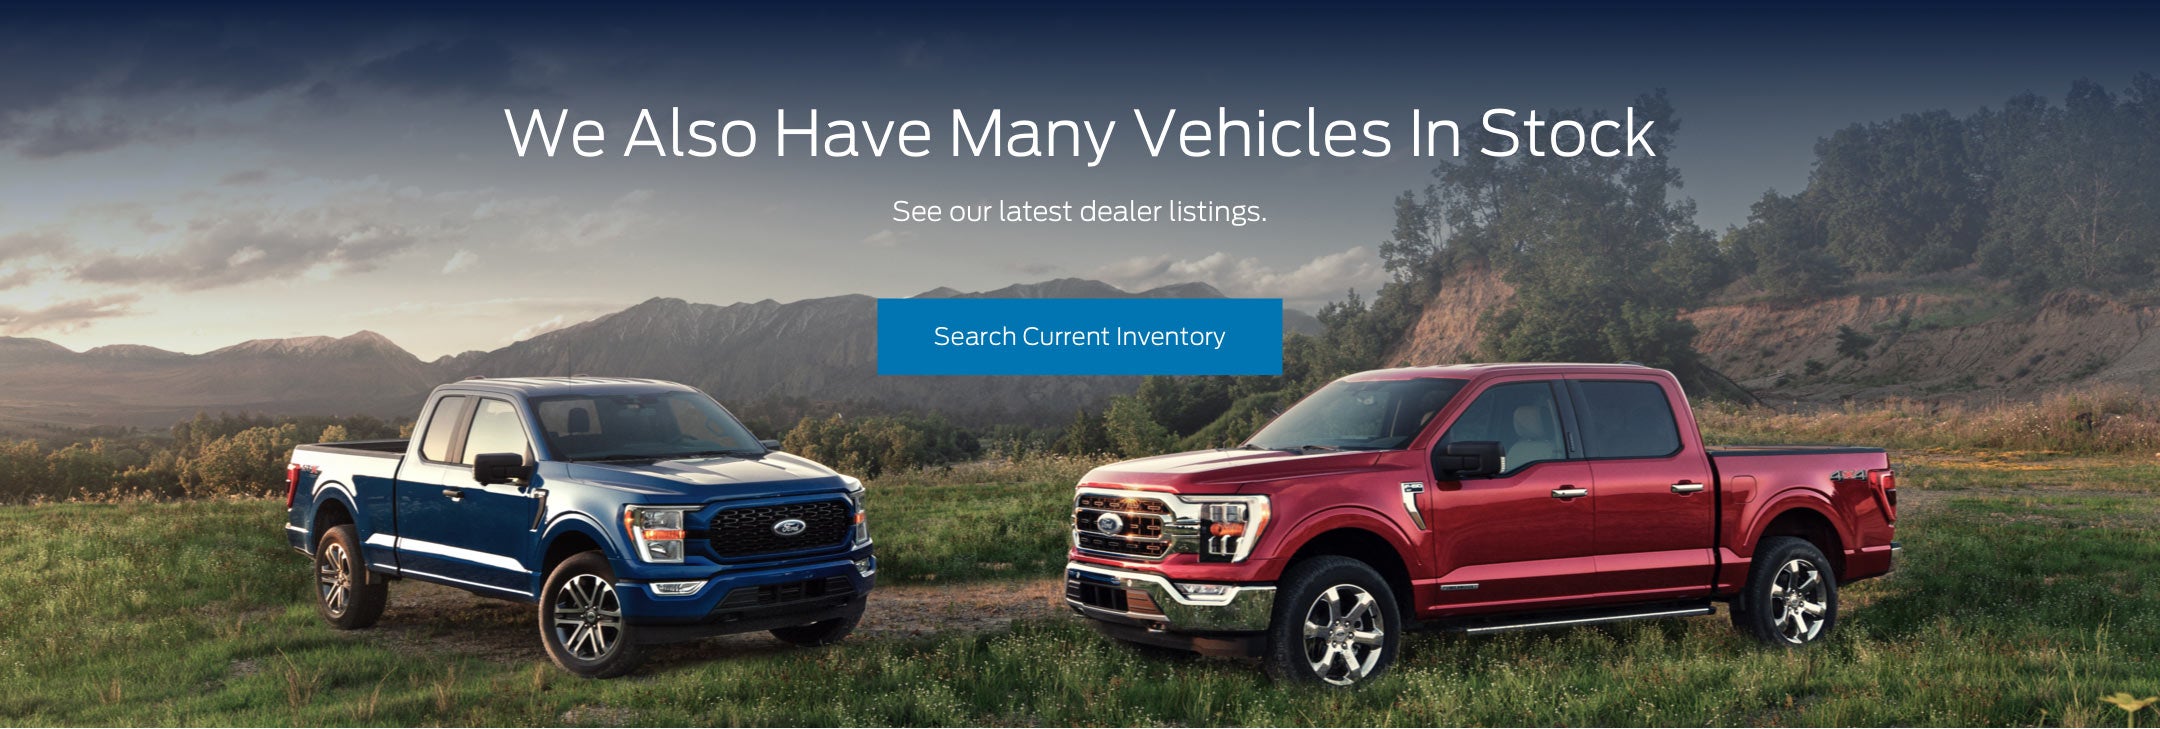 Ford vehicles in stock | Ed Morse Ford Red Bud in Red Bud IL